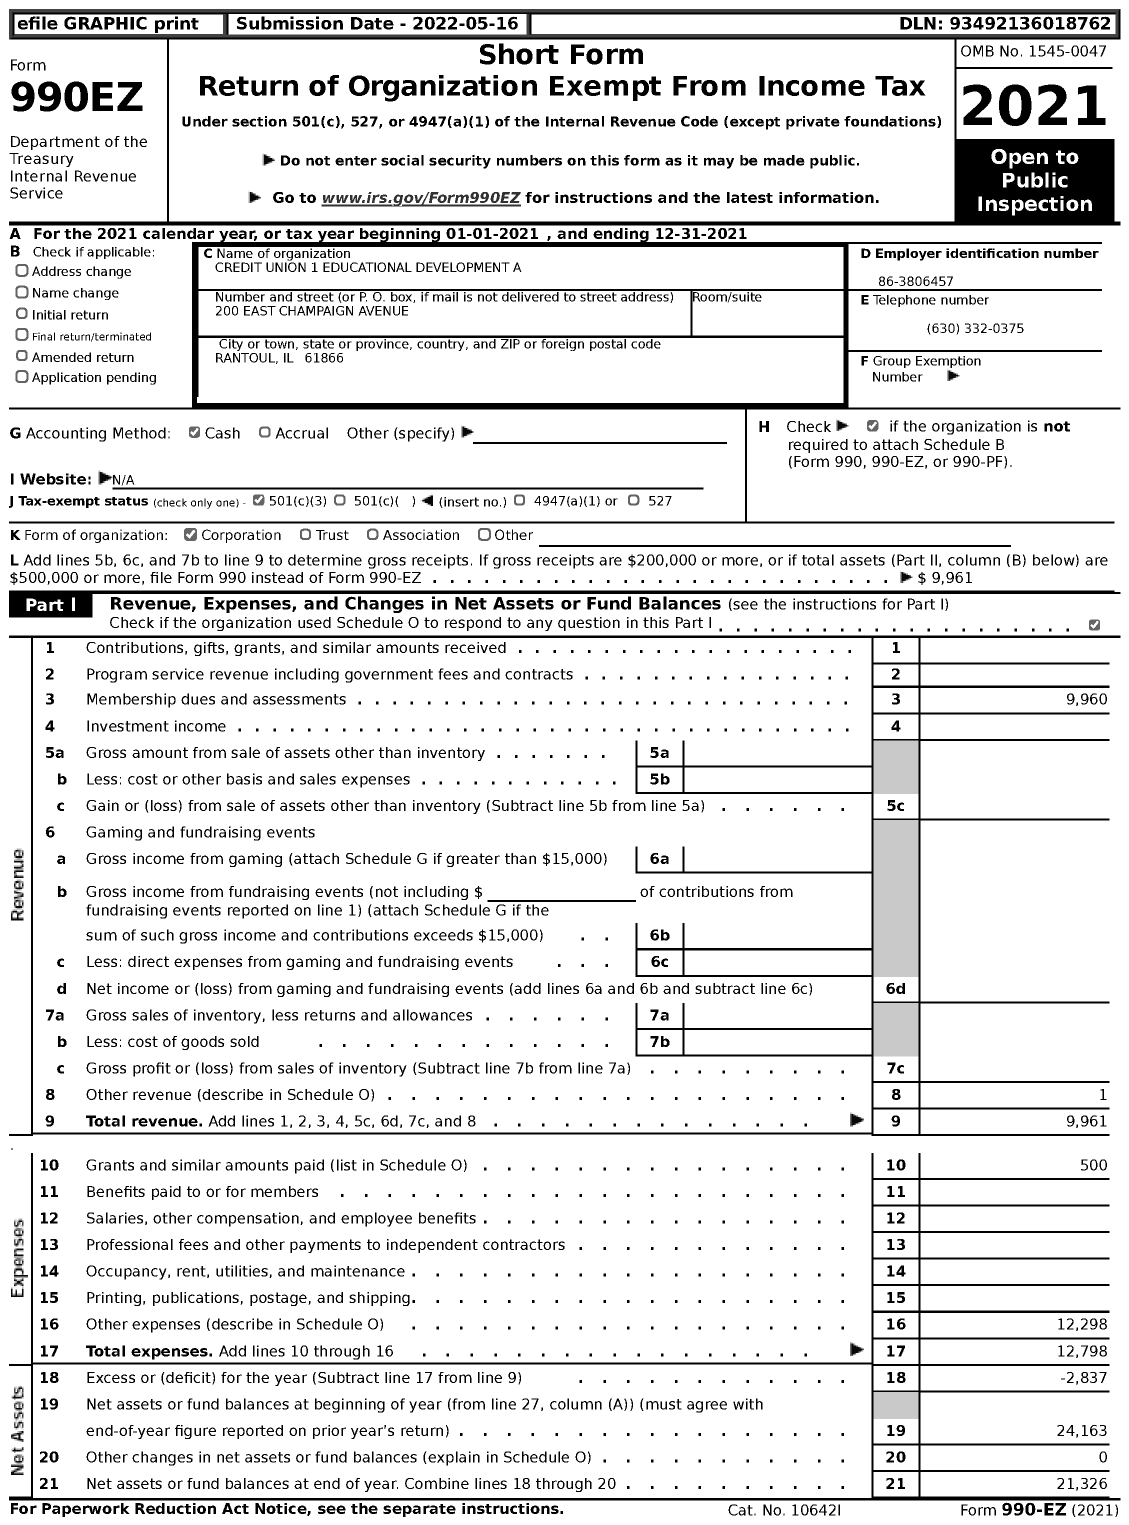 Image of first page of 2021 Form 990EZ for Credit Union 1 Educational Development A